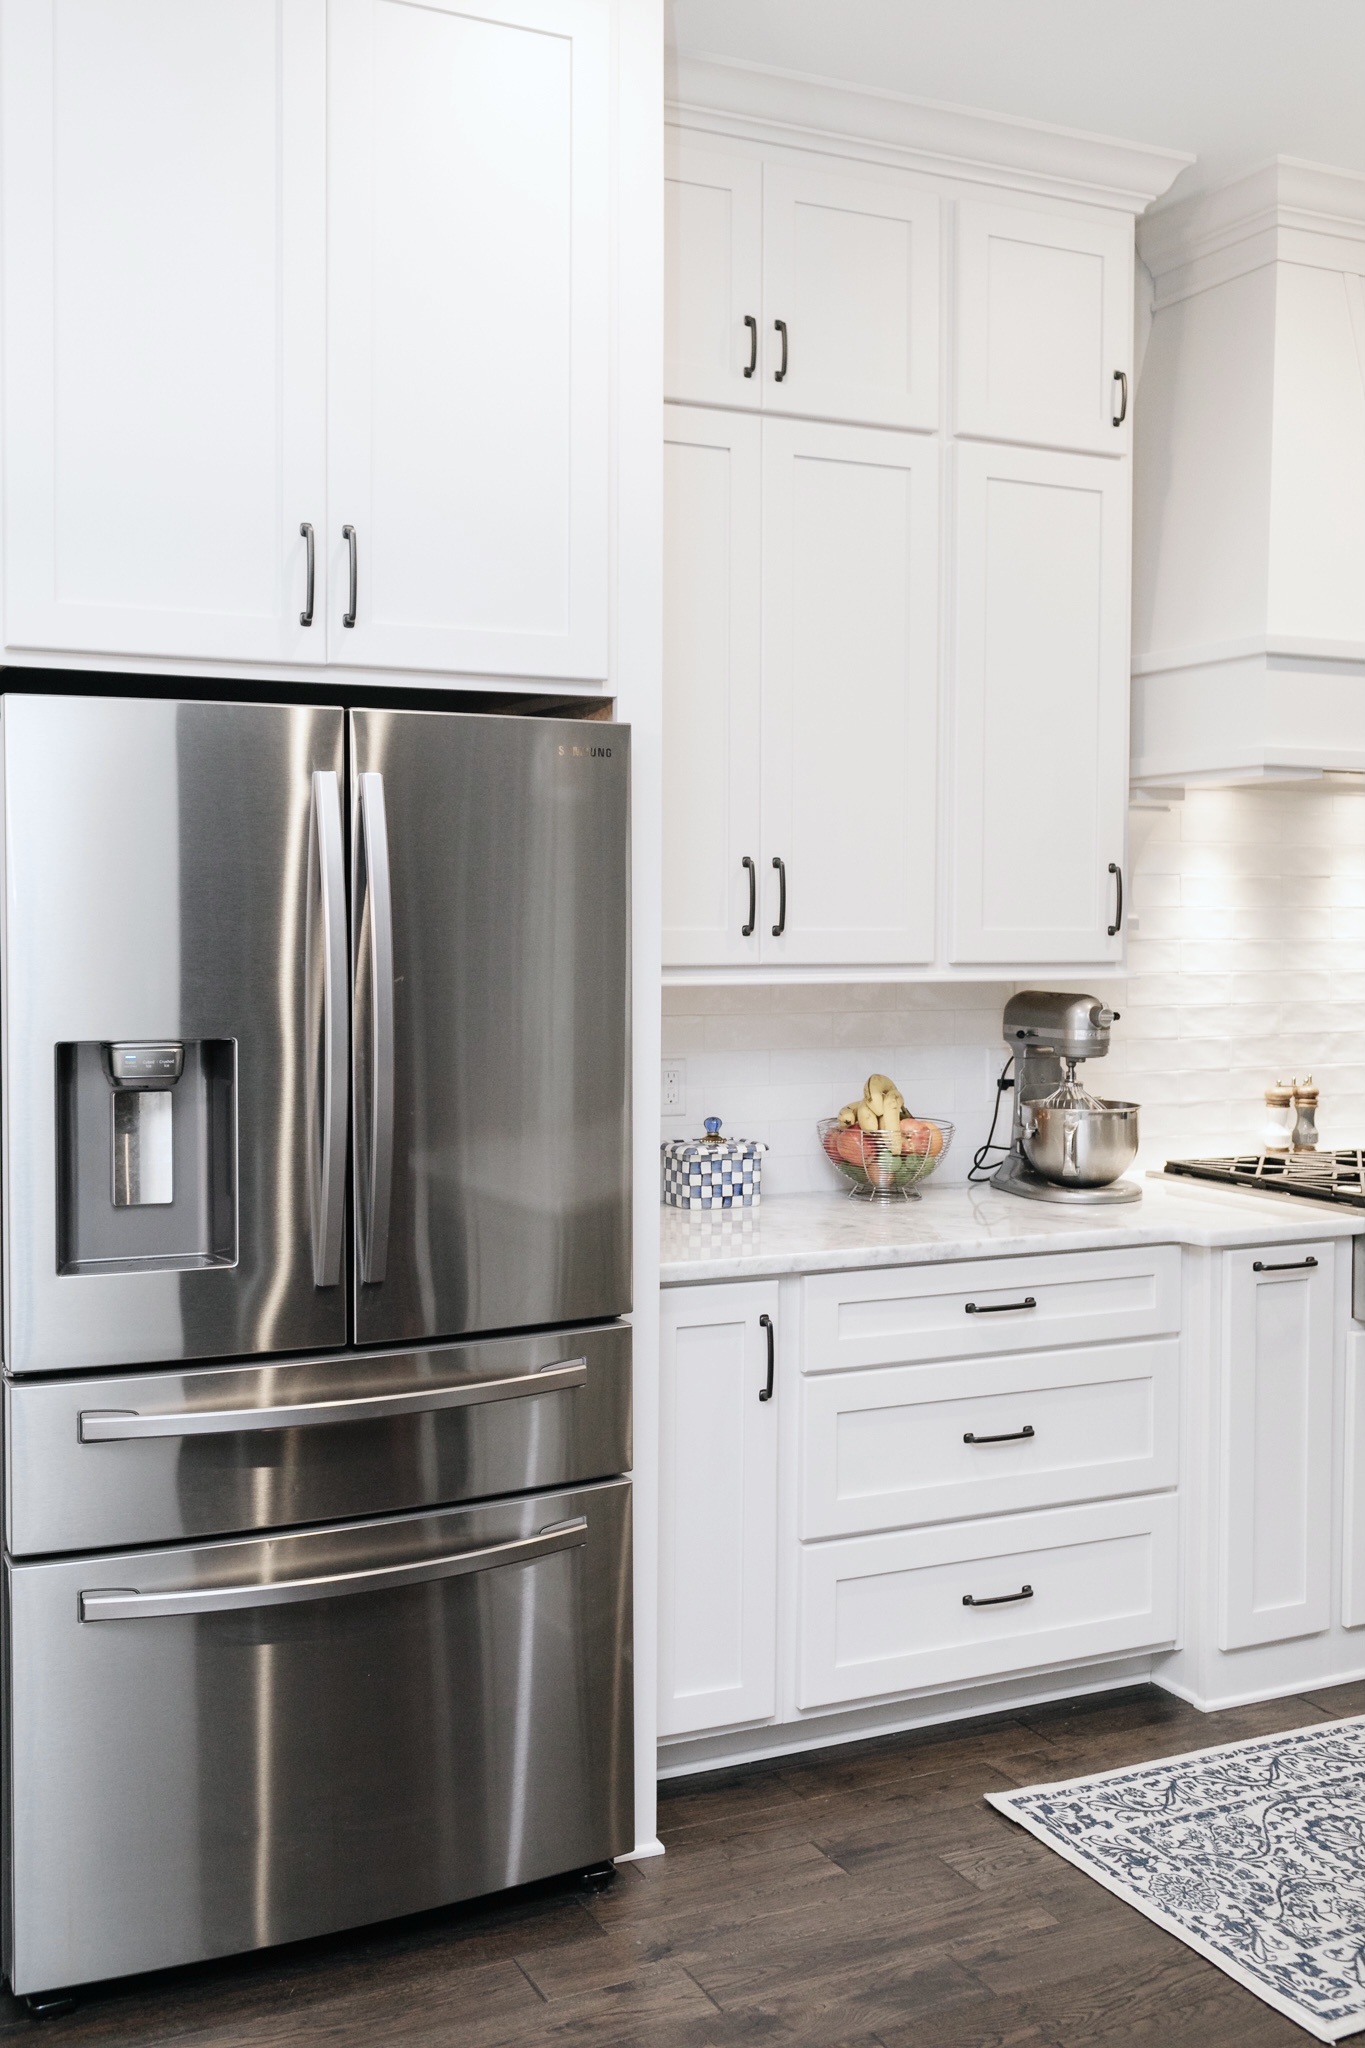 Best Home Appliances for the Kitchen featured by top Memphis lifestyle blogger, Walking in Memphis in High Heels.